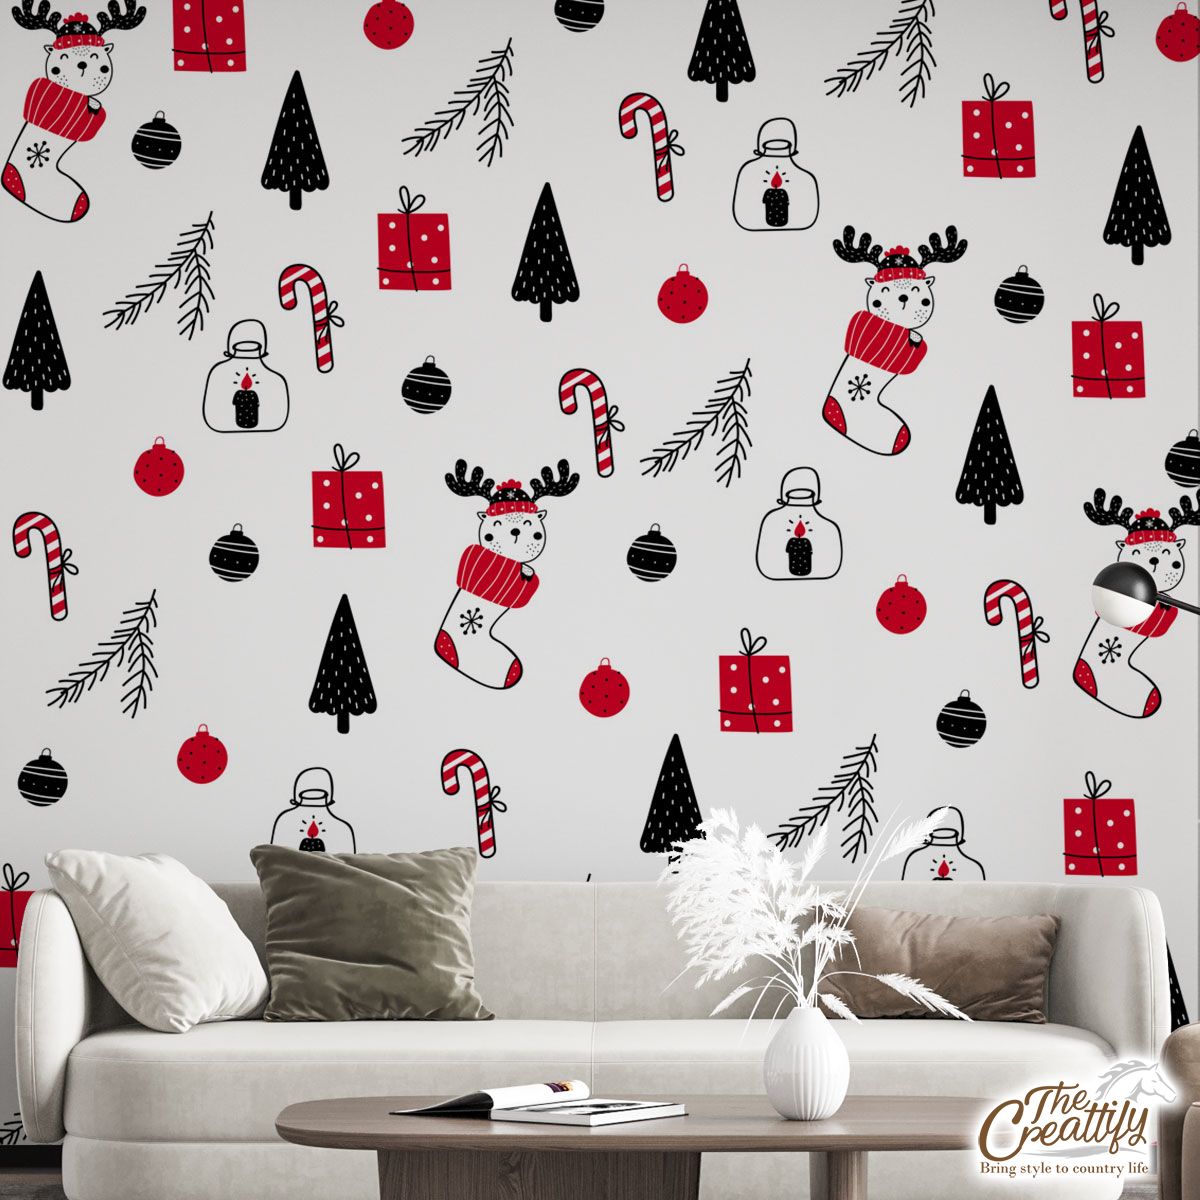 Reindeer Clipart In Hand Drawn Red Socks, Christmas Balls, Candy Canes, And Christmas Gifts Seamless White Pattern Wall Mural